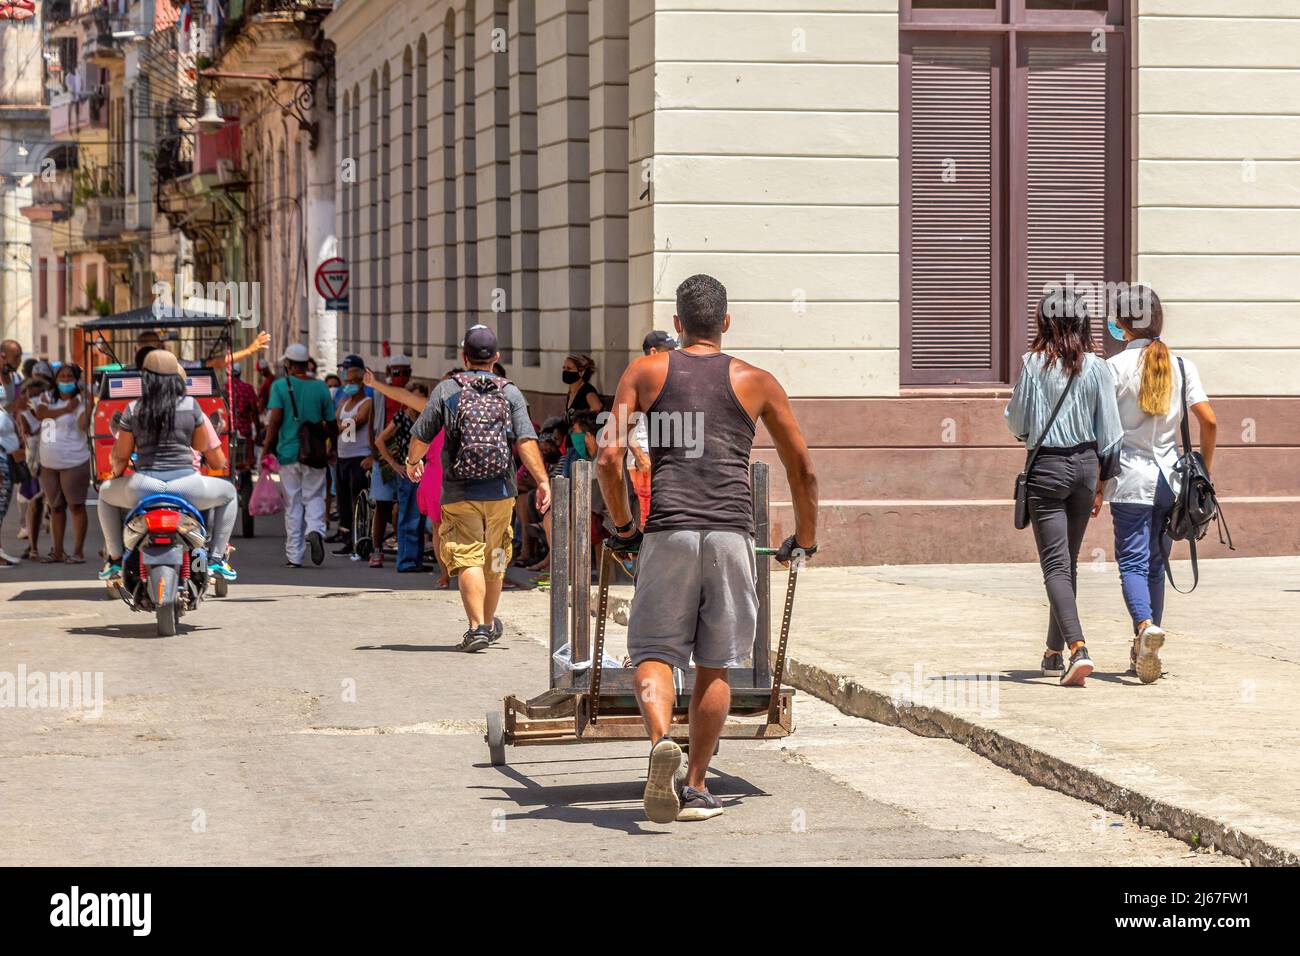 A Cuban man pushes a cart where carries an upside-down table. A large group of people is seen in the background. Stock Photo